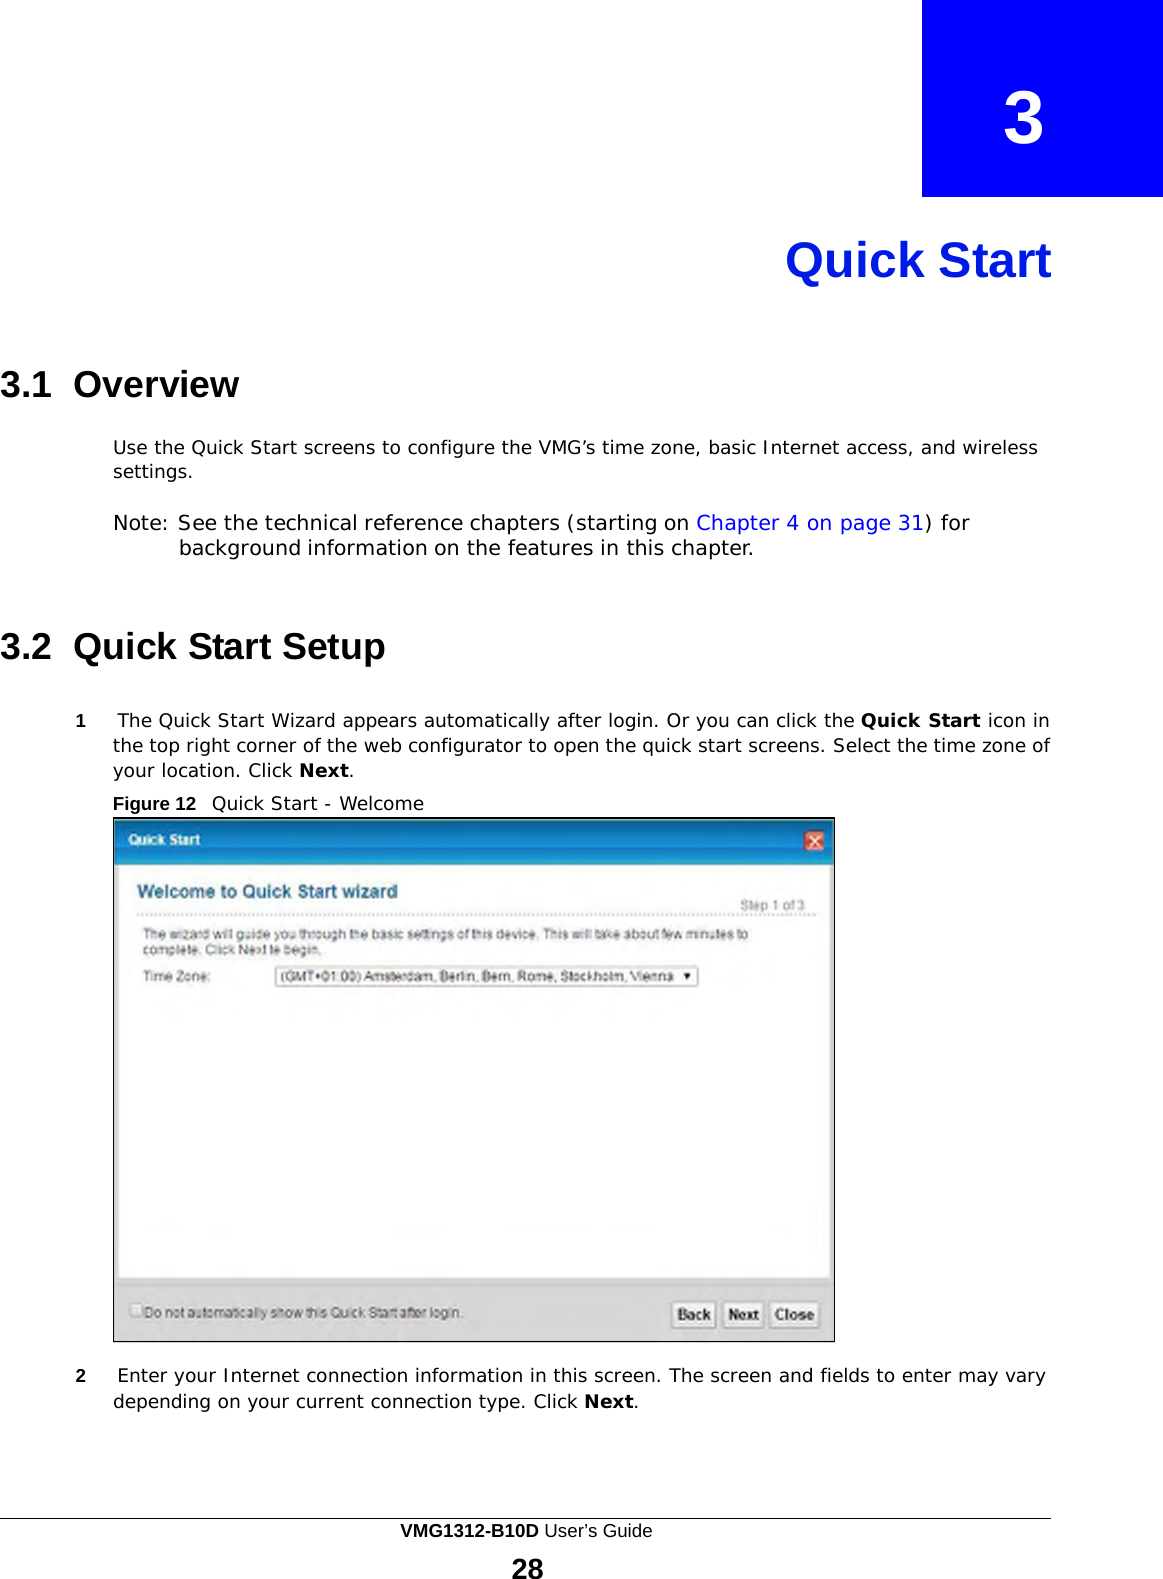    3    Quick Start     3.1  Overview  Use the Quick Start screens to configure the VMG’s time zone, basic Internet access, and wireless settings.  Note: See the technical reference chapters (starting on Chapter 4 on page 31) for background information on the features in this chapter.    3.2  Quick Start Setup   1     The Quick Start Wizard appears automatically after login. Or you can click the Quick Start icon in the top right corner of the web configurator to open the quick start screens. Select the time zone of your location. Click Next. Figure 12   Quick Start - Welcome                           2     Enter your Internet connection information in this screen. The screen and fields to enter may vary depending on your current connection type. Click Next. VMG1312-B10D User’s Guide 28  